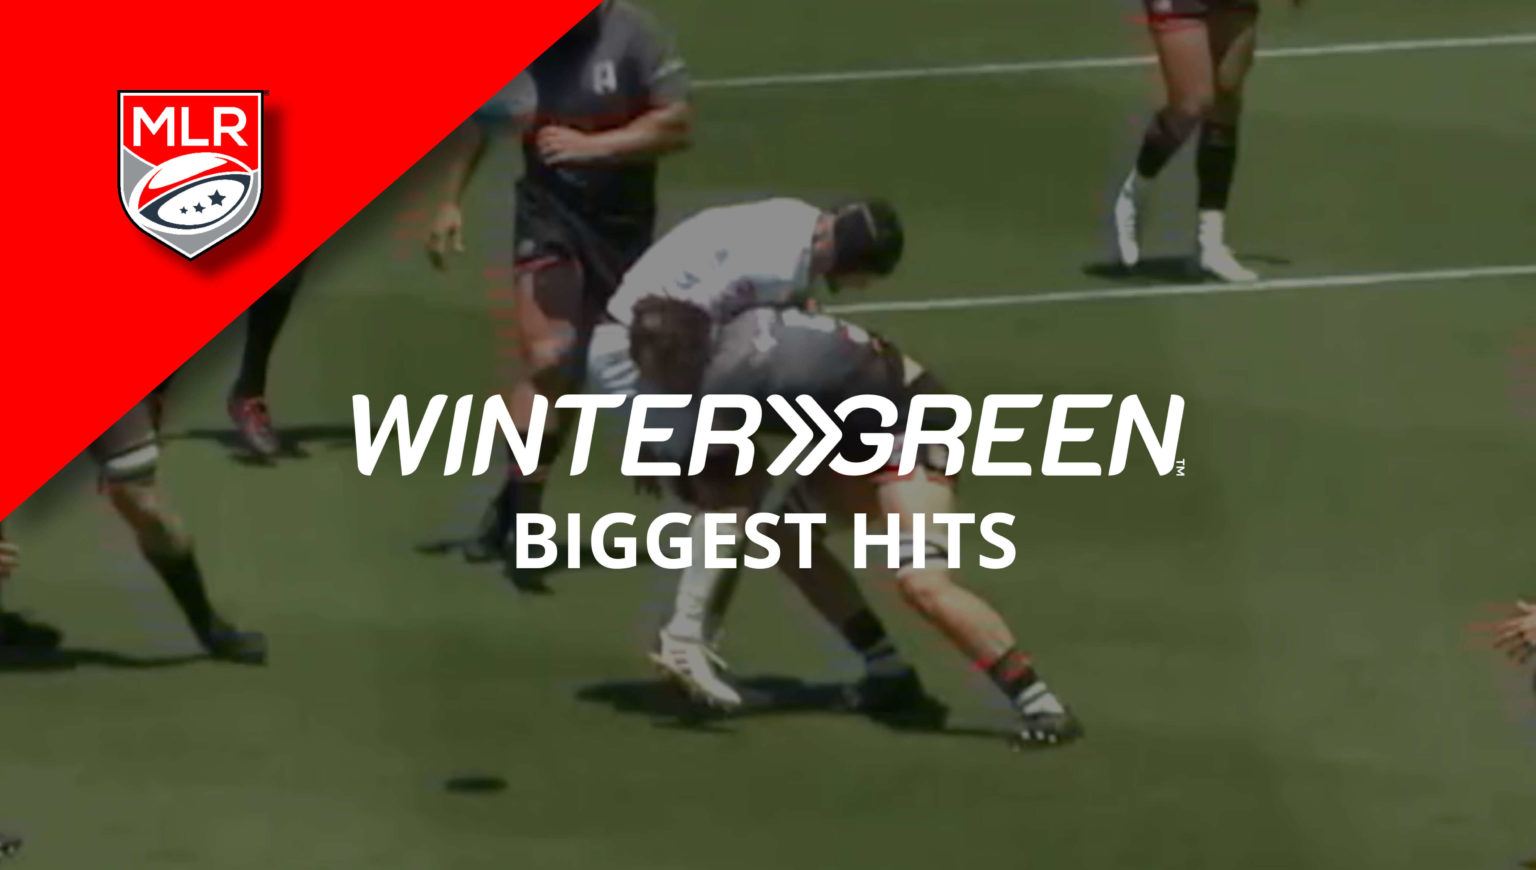 Mlr Biggest Hits Championship Final Major League Rugby